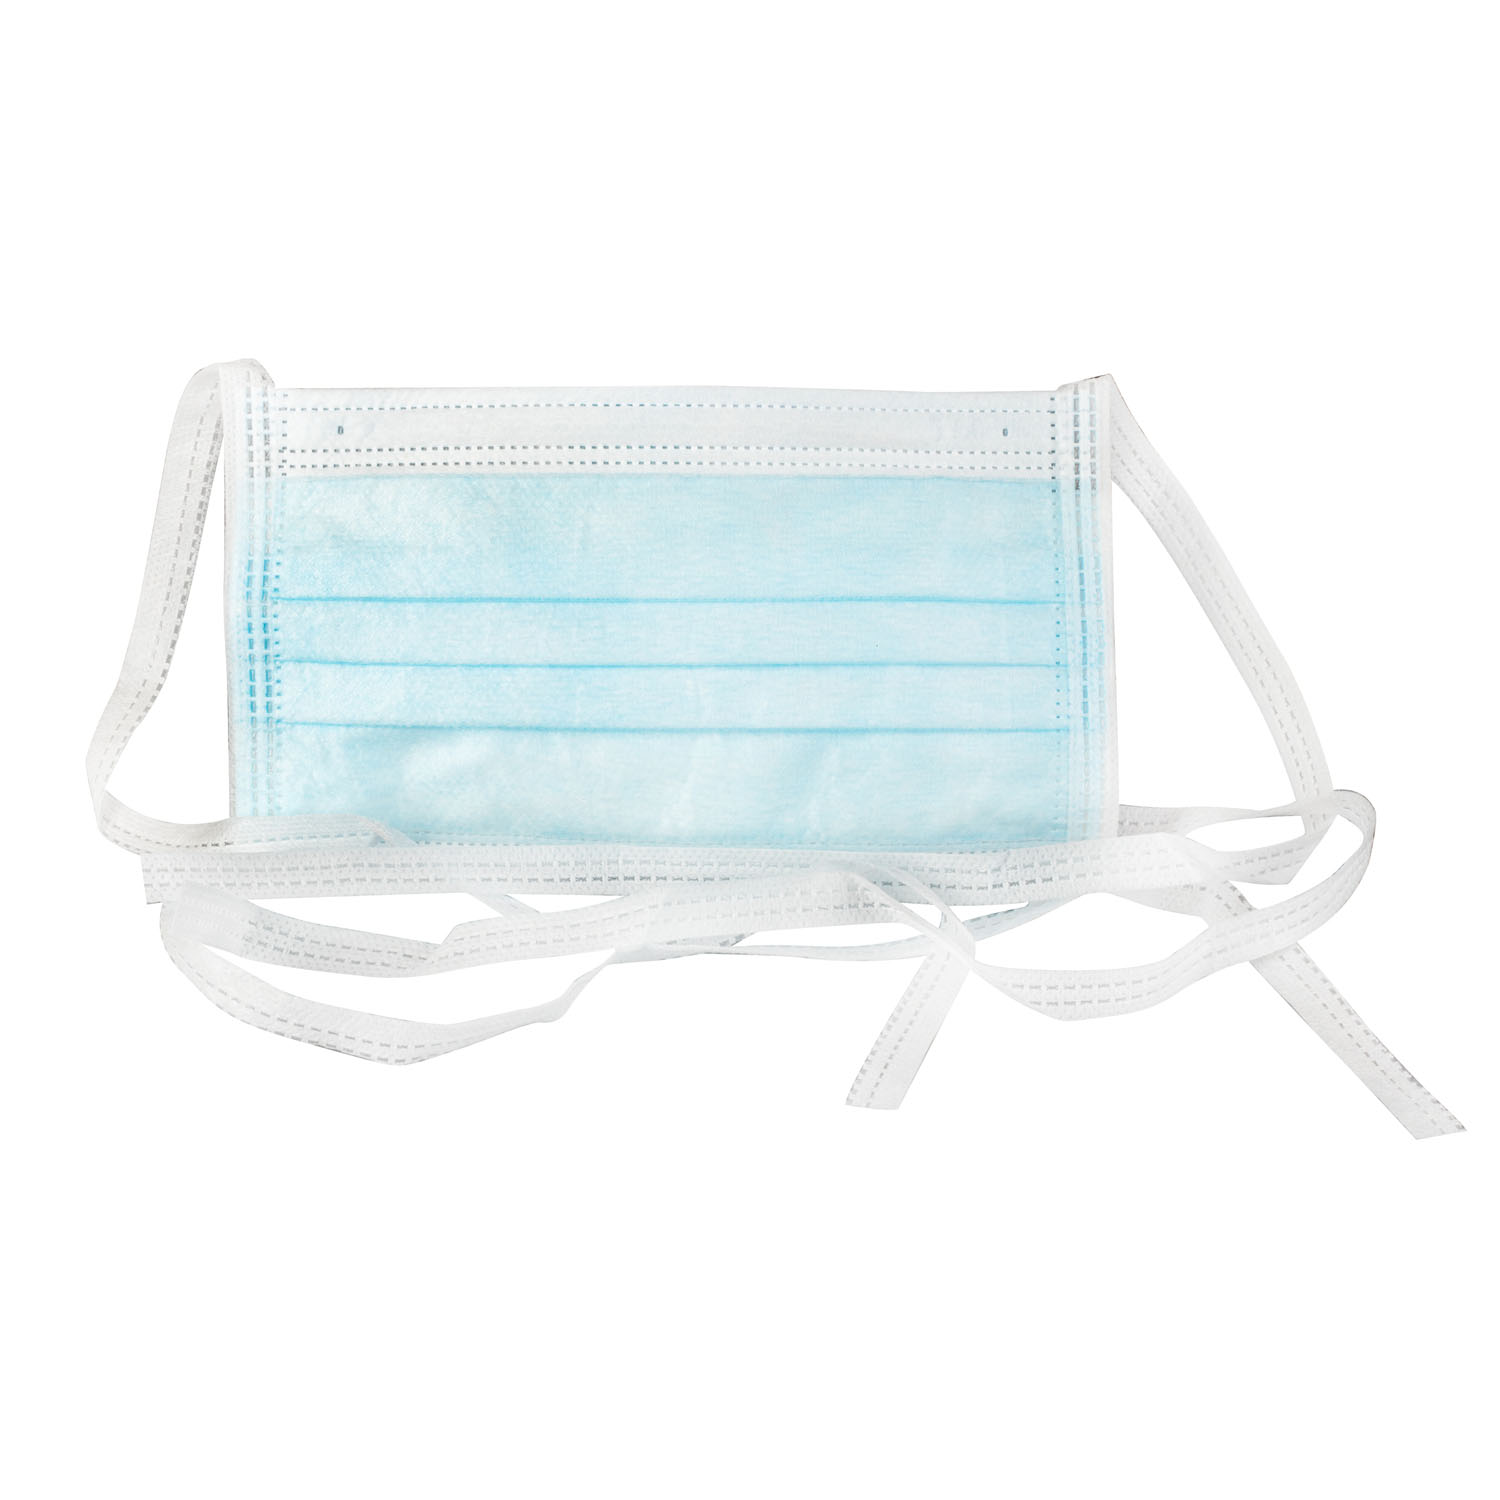 DUKAL SURGICAL FACE MASKS : 1540 BX $11.04 Stocked